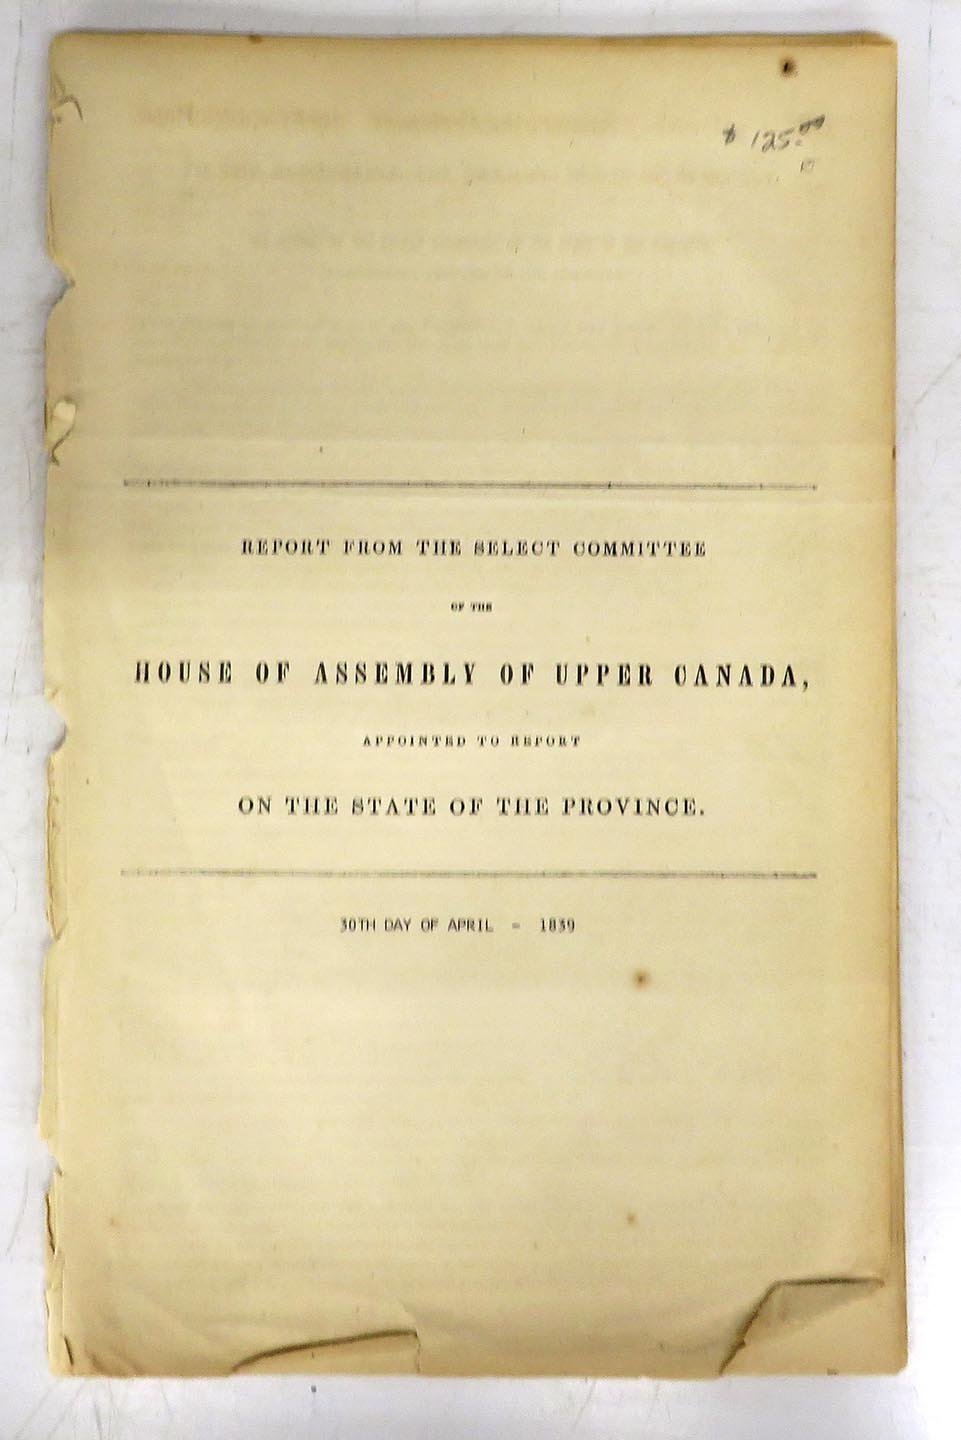 Report from the Select Committee of the House of Assembly of Upper Canada, Appointed to Report on the State of the Province